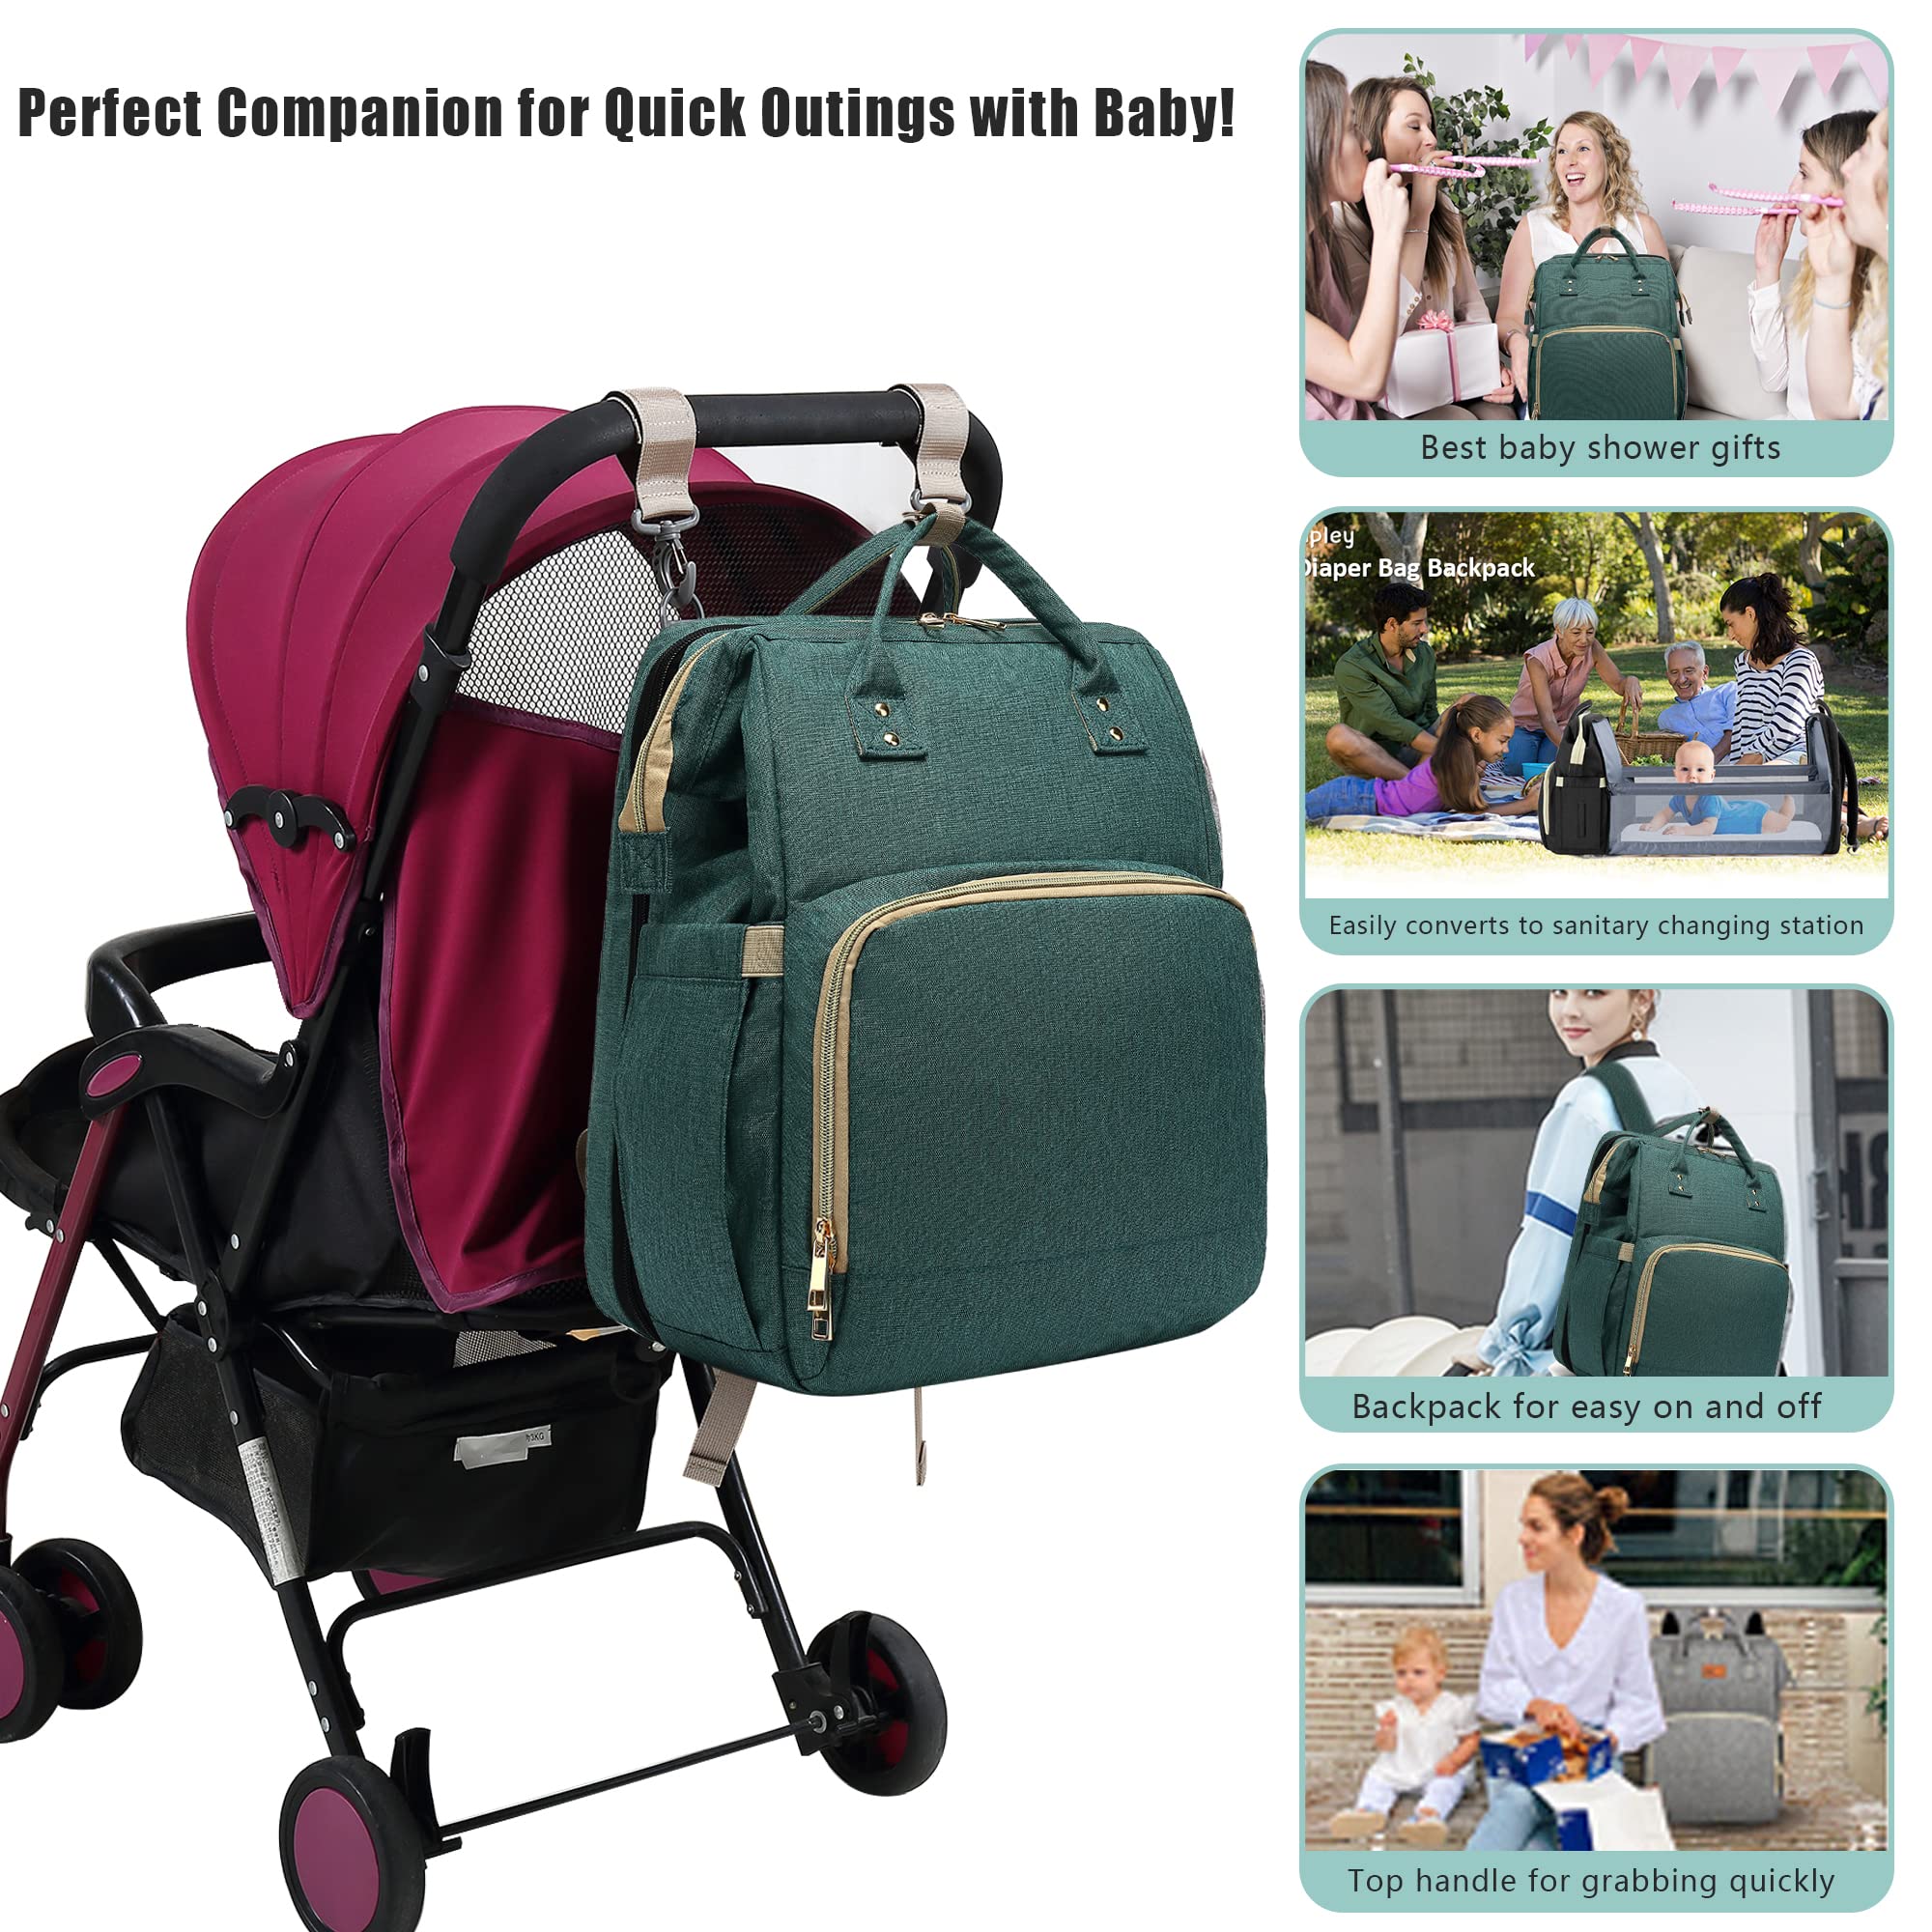 Baby Diaper Bag Backpack with Changing Station - Waterproof, Large 30L Capacity for Boy, Girl, Mom, Dad - Travel Baby Bag with Stroller Straps, Insulated Pockets - 16.5x9.4x14